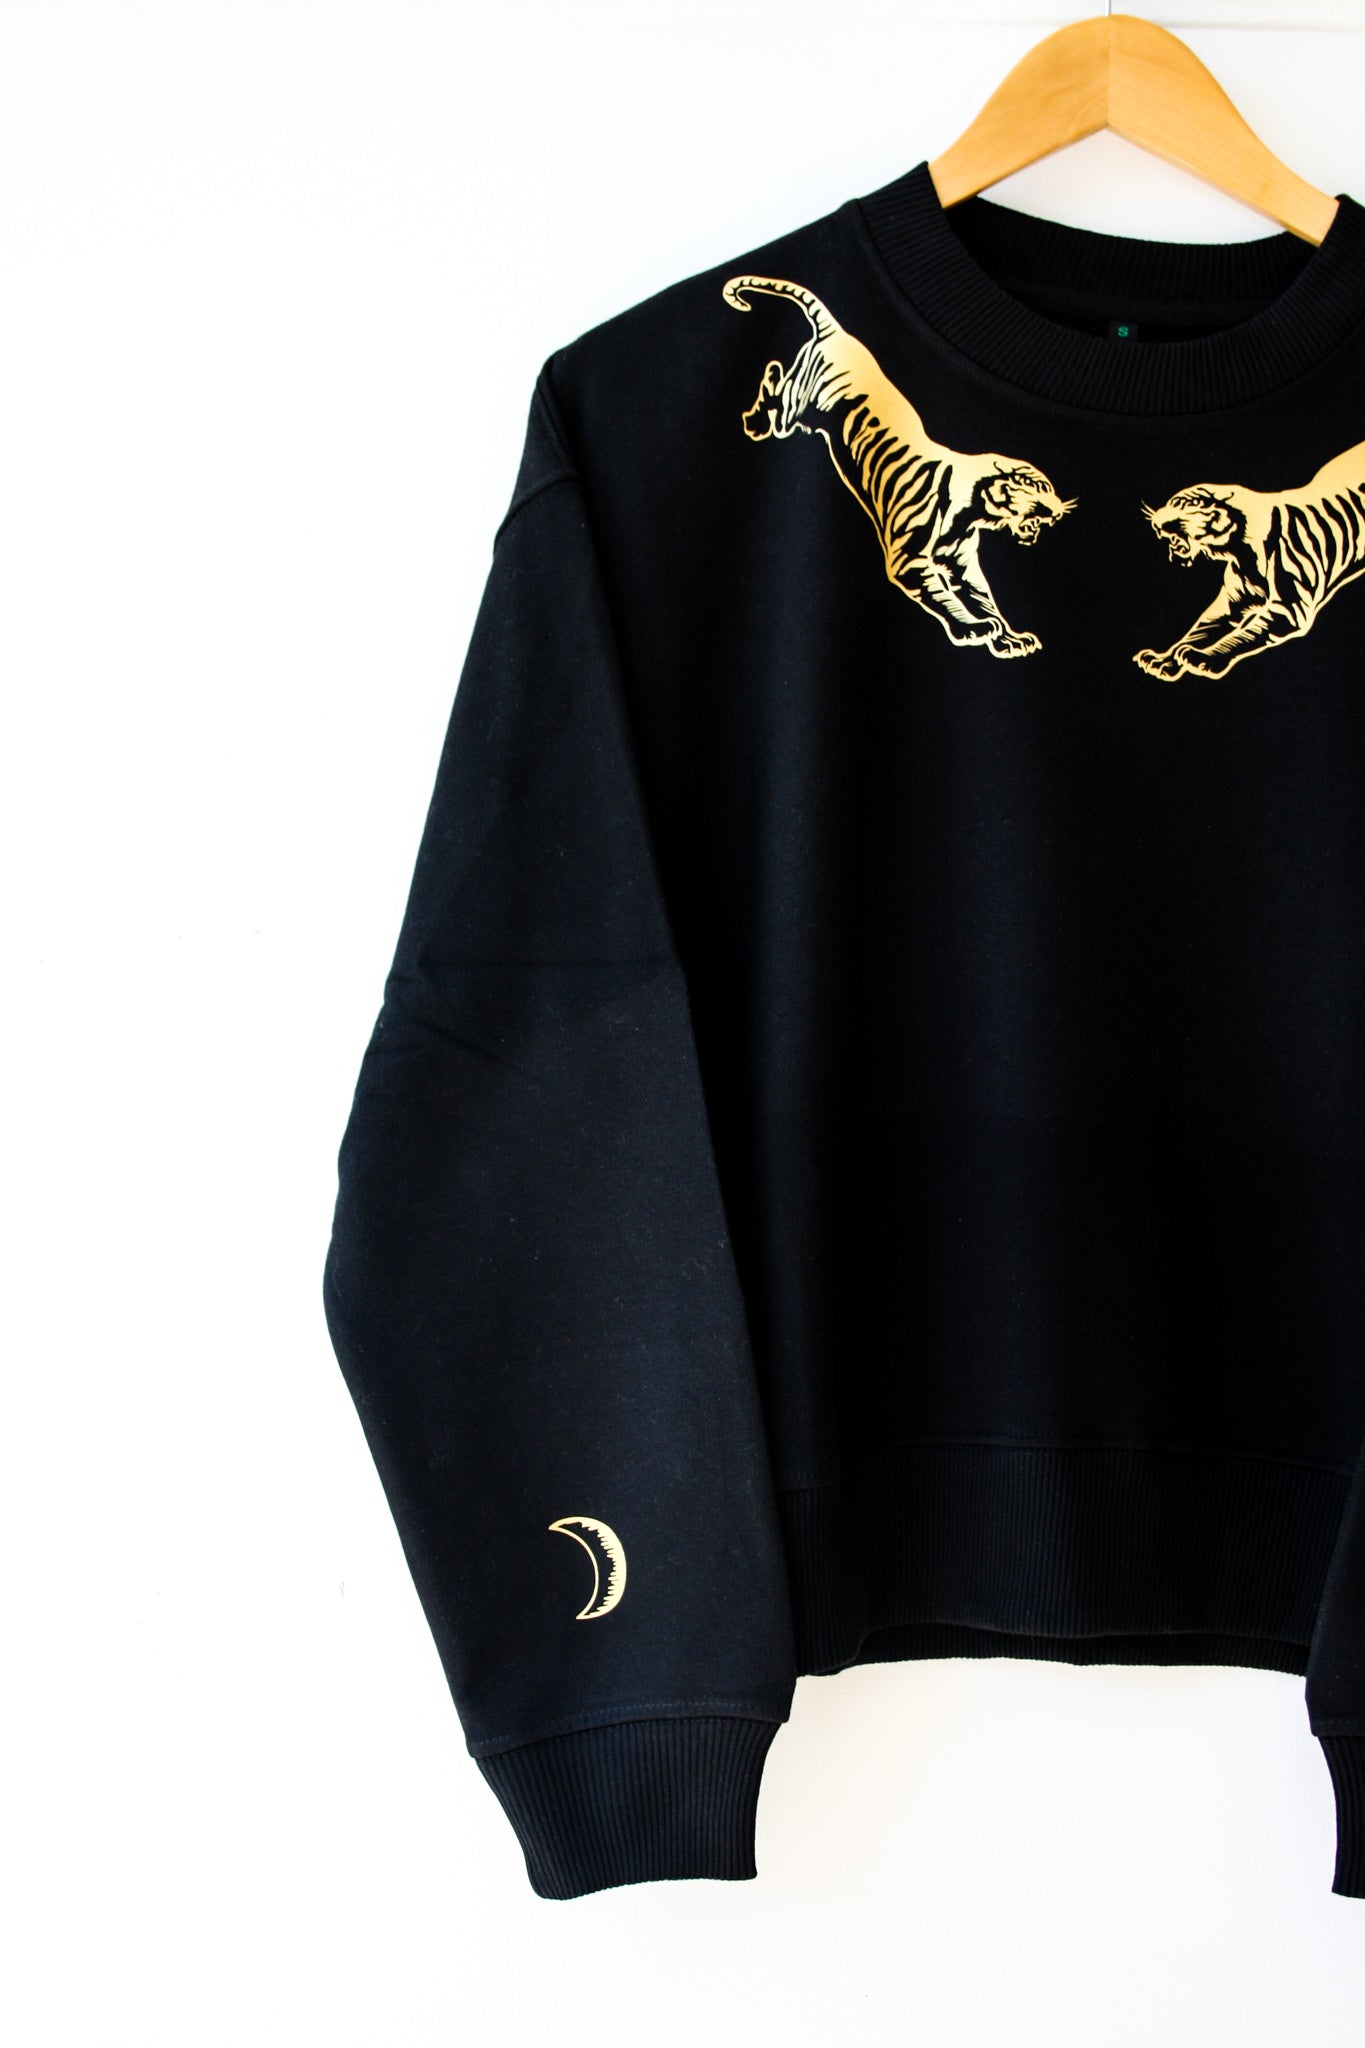 Black Sweater with gold flyings tigers